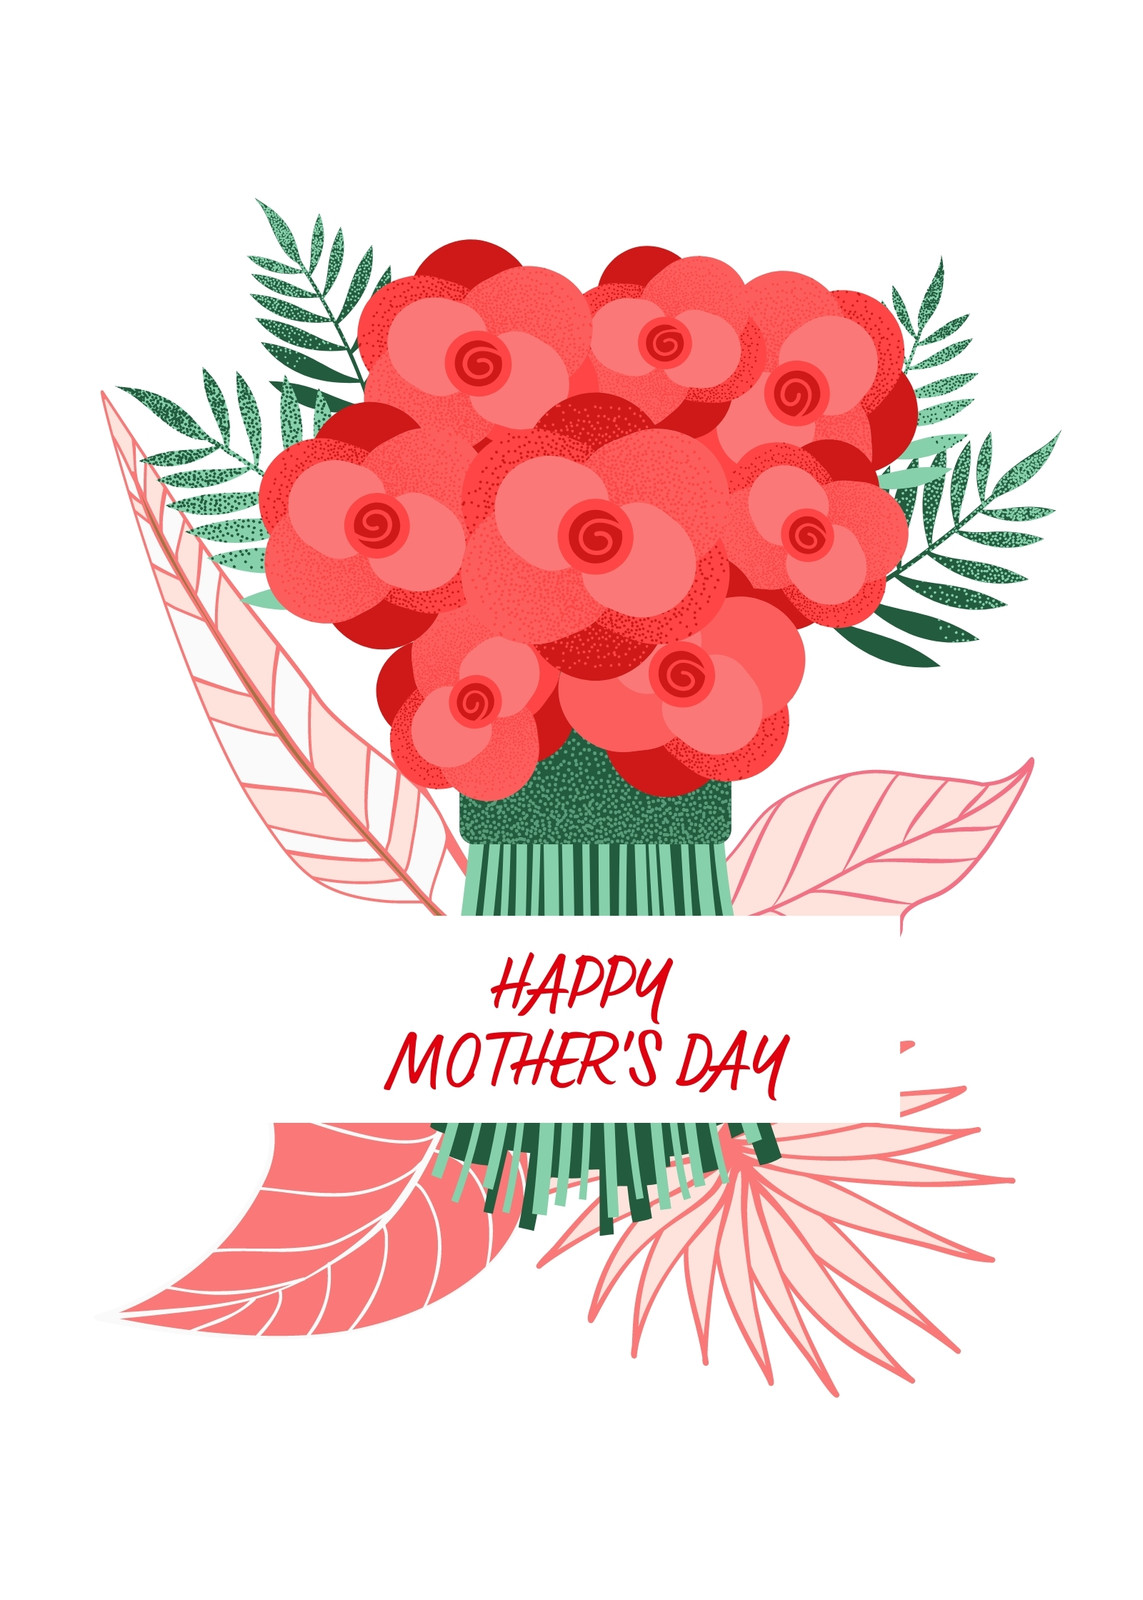 Happy Mother's Day 2021 Wishes, WhatsApp Messages & HD Images: Motherhood  Quotes, Facebook Status, Signal Photos and Telegram Cute GIFs to Celebrate  Amazing Moms